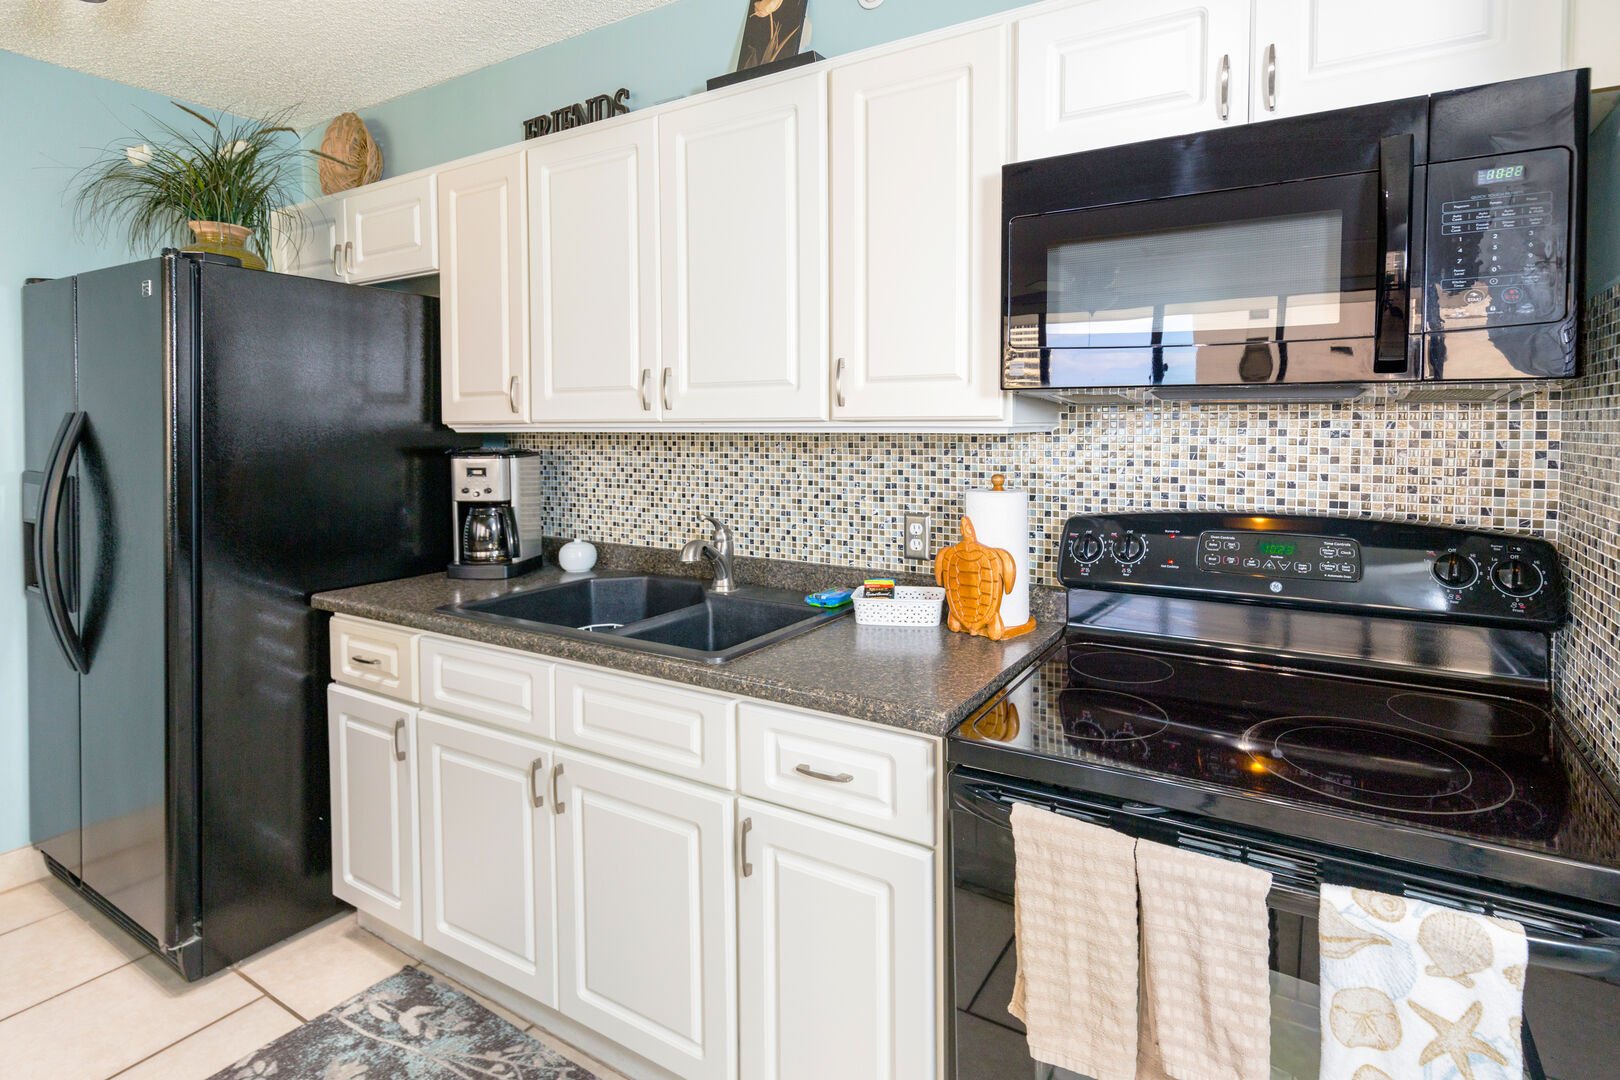 Fully equipped kitchen with toaster, coffee maker, rice cooker, blender, kettle, pots, pans, silverware, cookware, dishes.